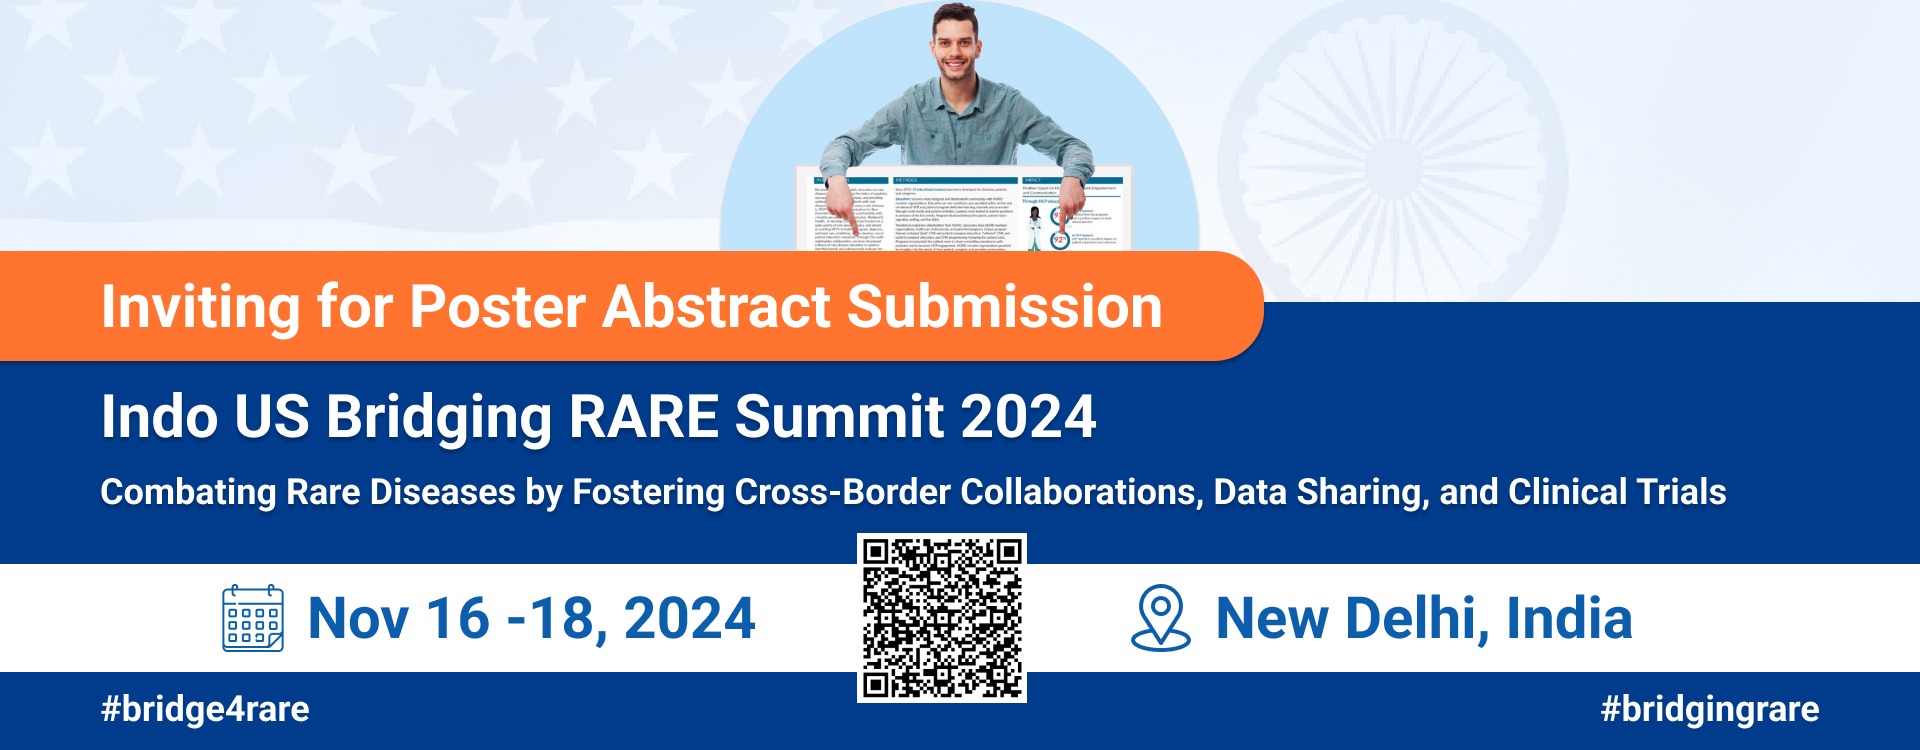 Inviting for poster Abstract Submission Indo US Bridging RARE Summit 2024 